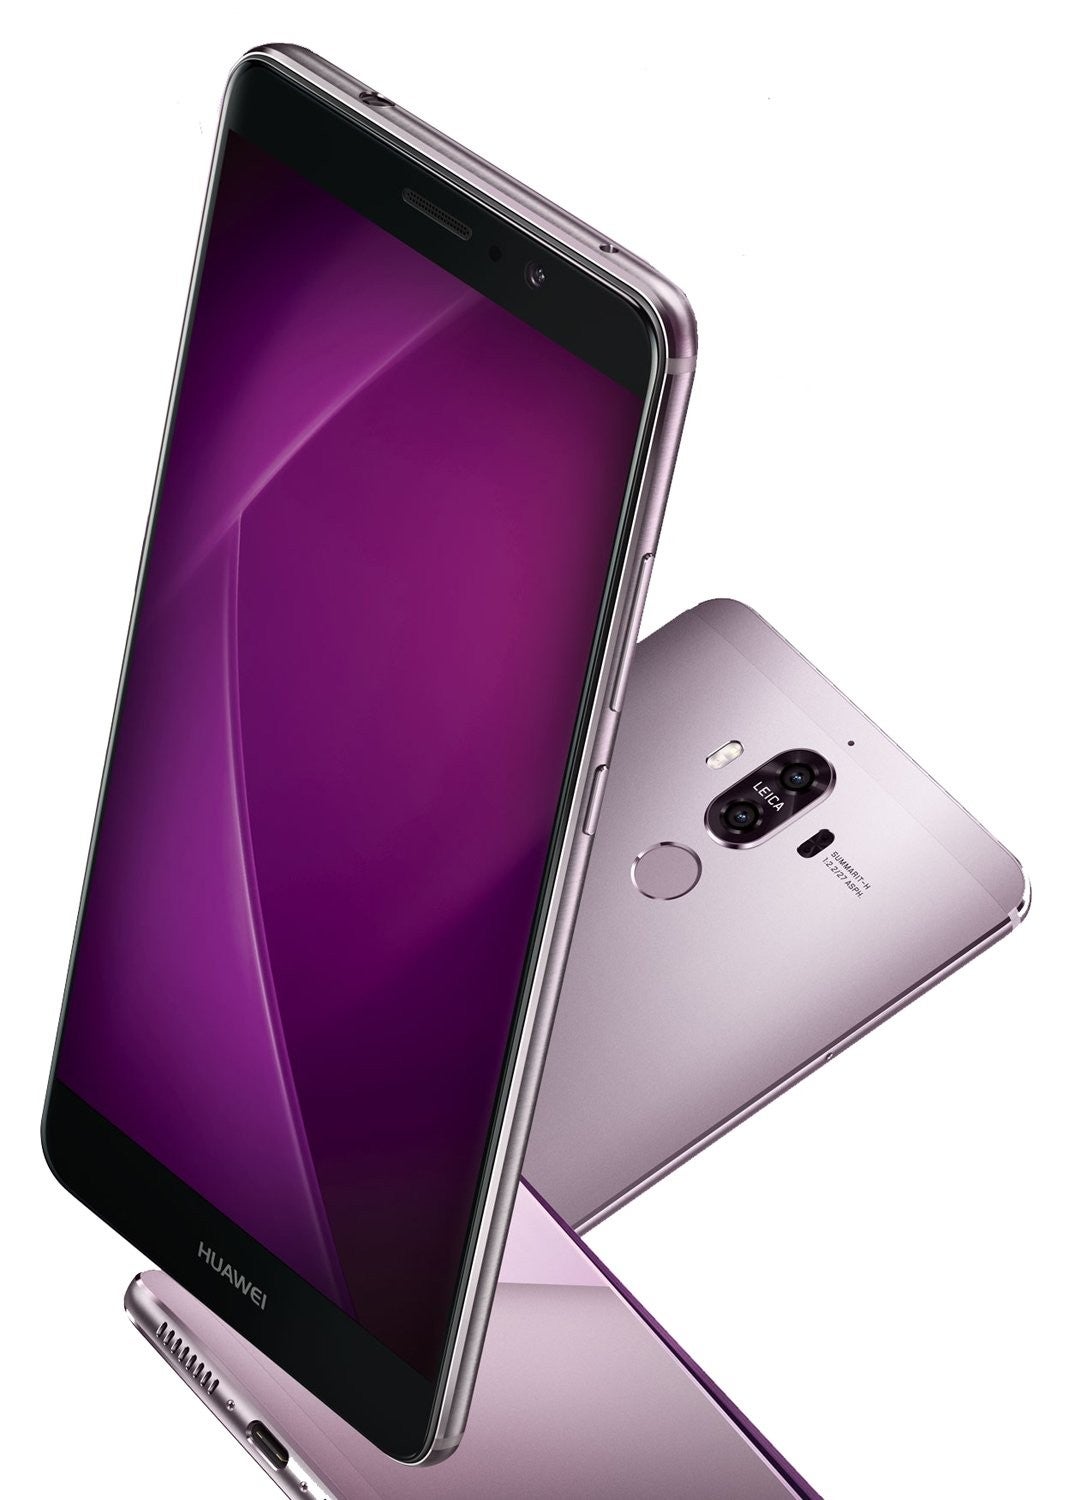 New Huawei Mate 9 official render leaks ahead of launch